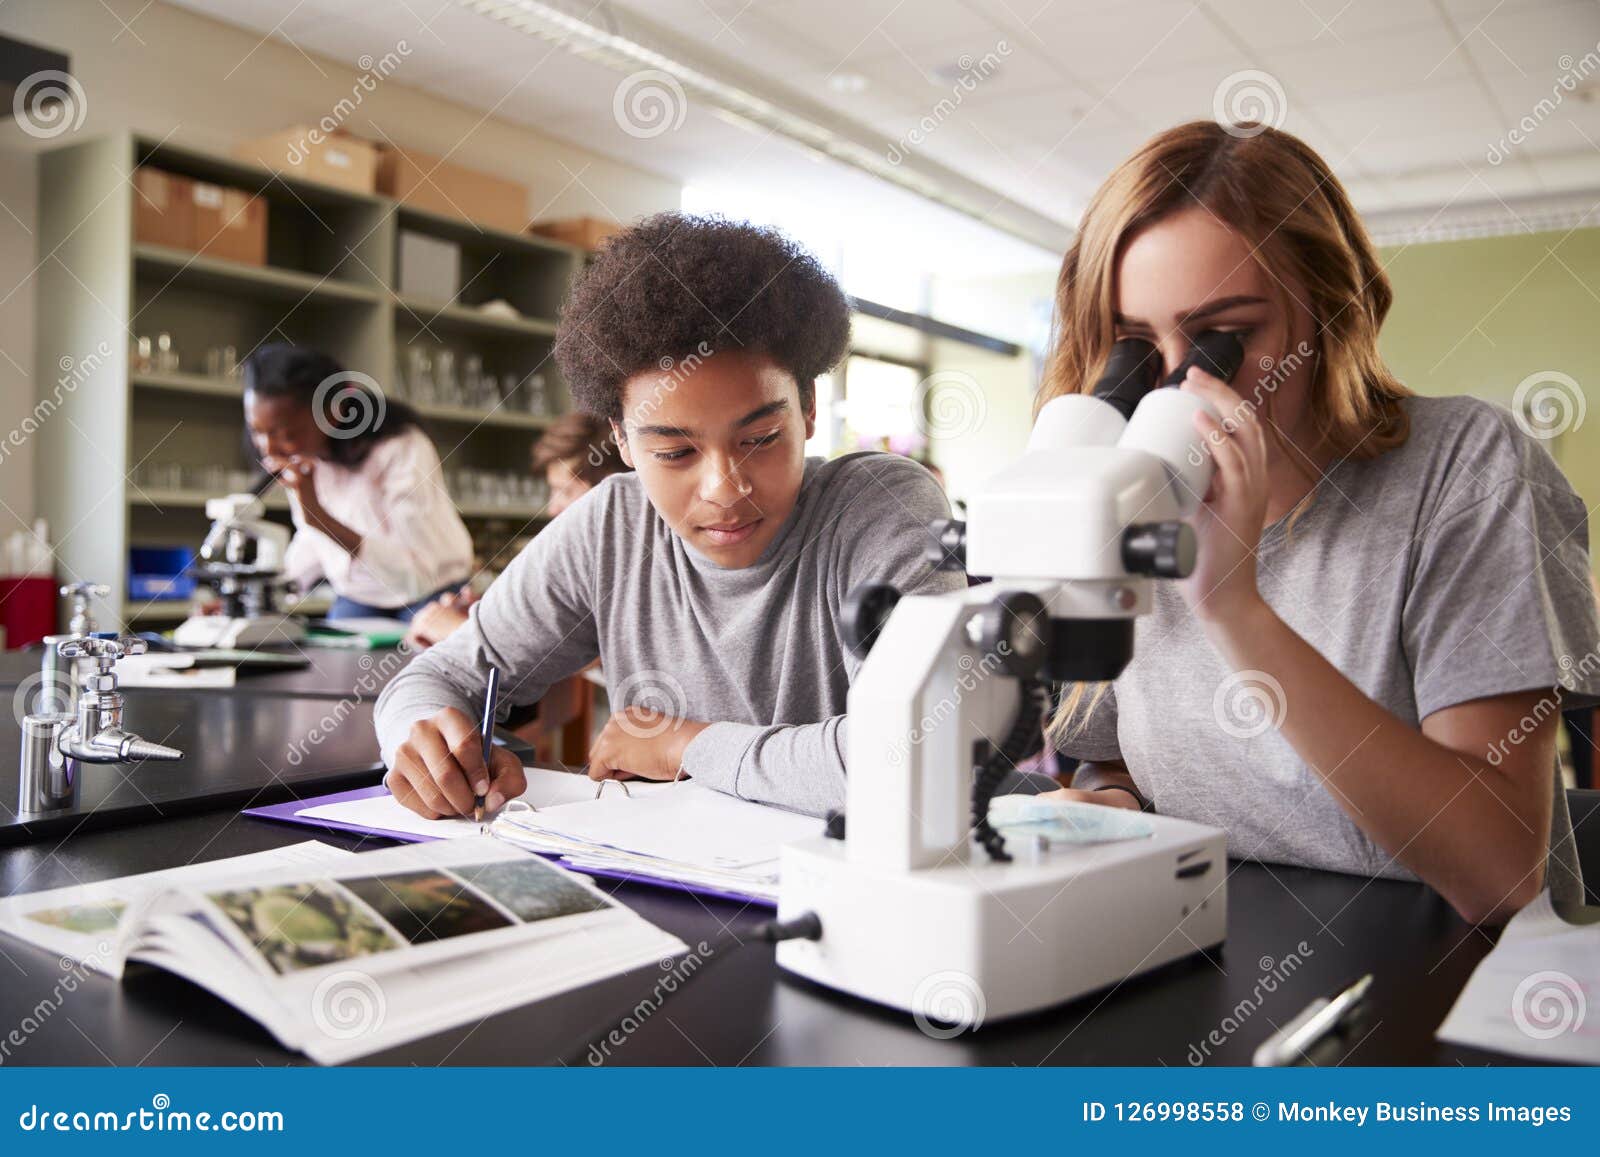 high school students looking through microscope in biology class